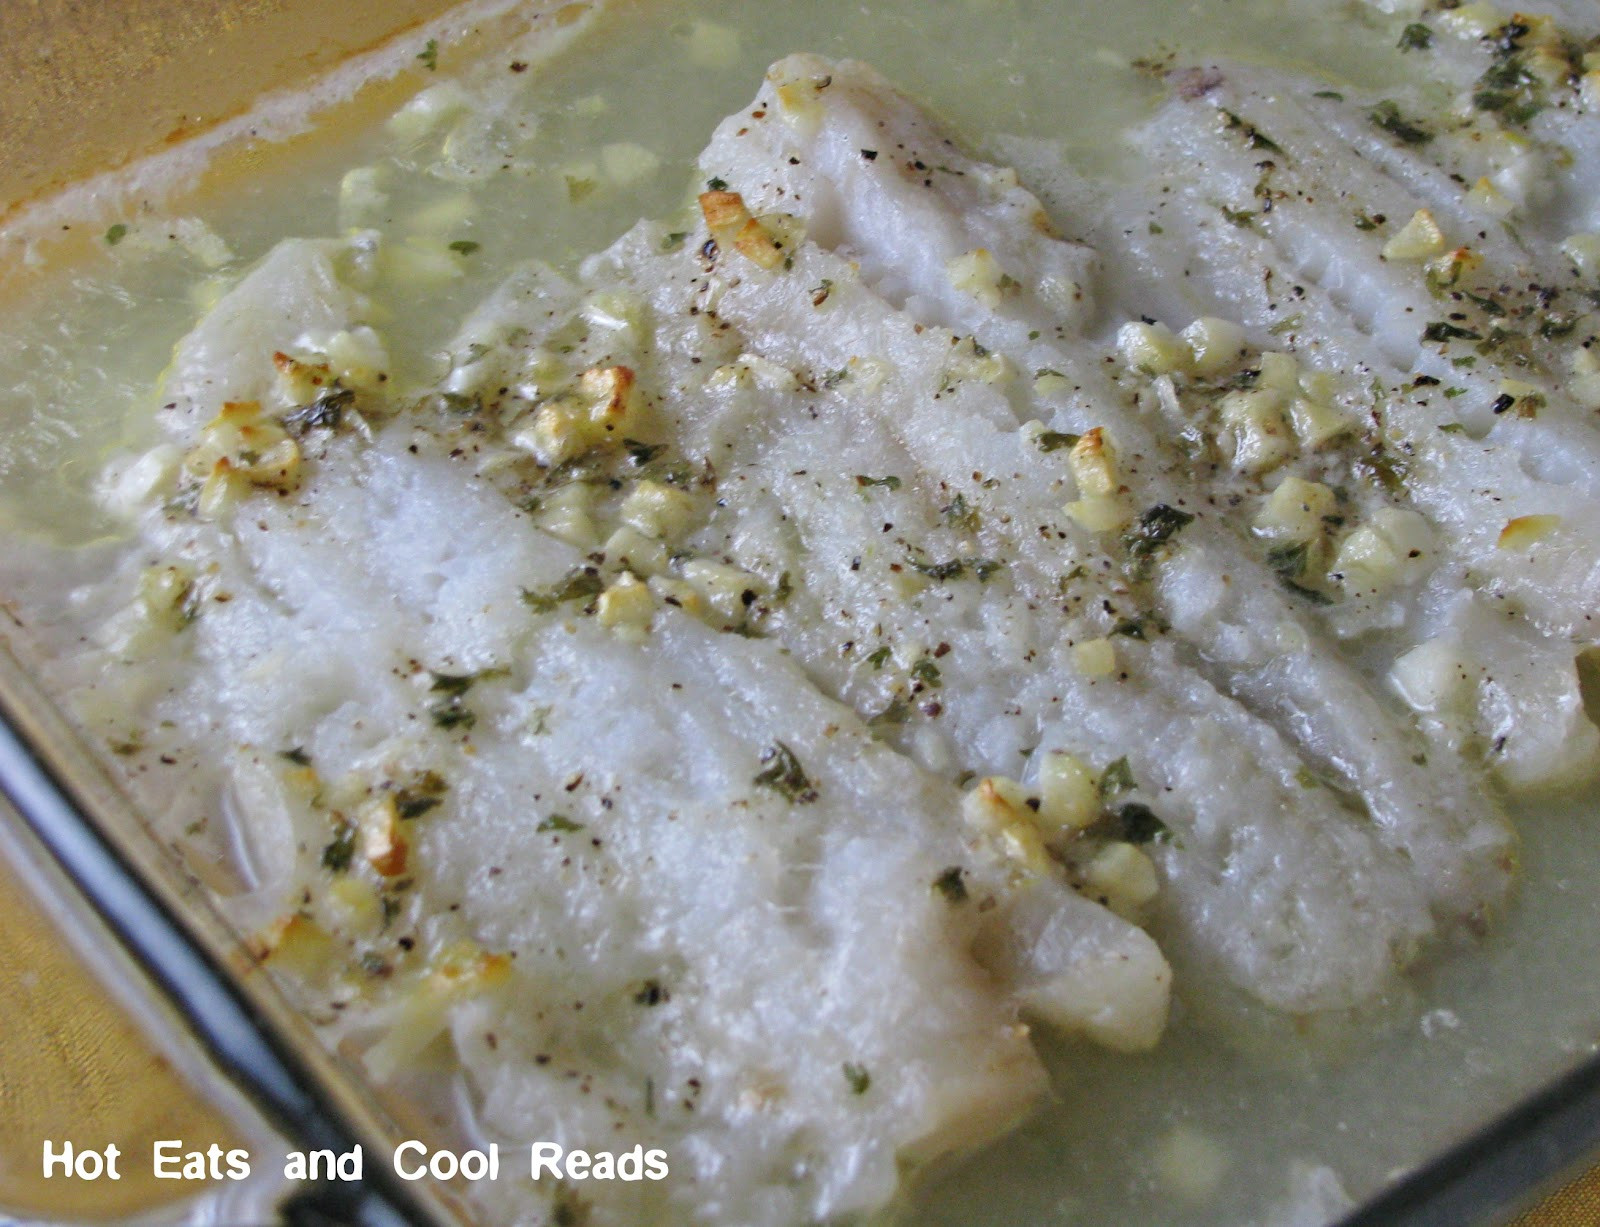 Baked Pollock Fish Recipes
 Hot Eats and Cool Reads Garlic Butter Baked Pollock